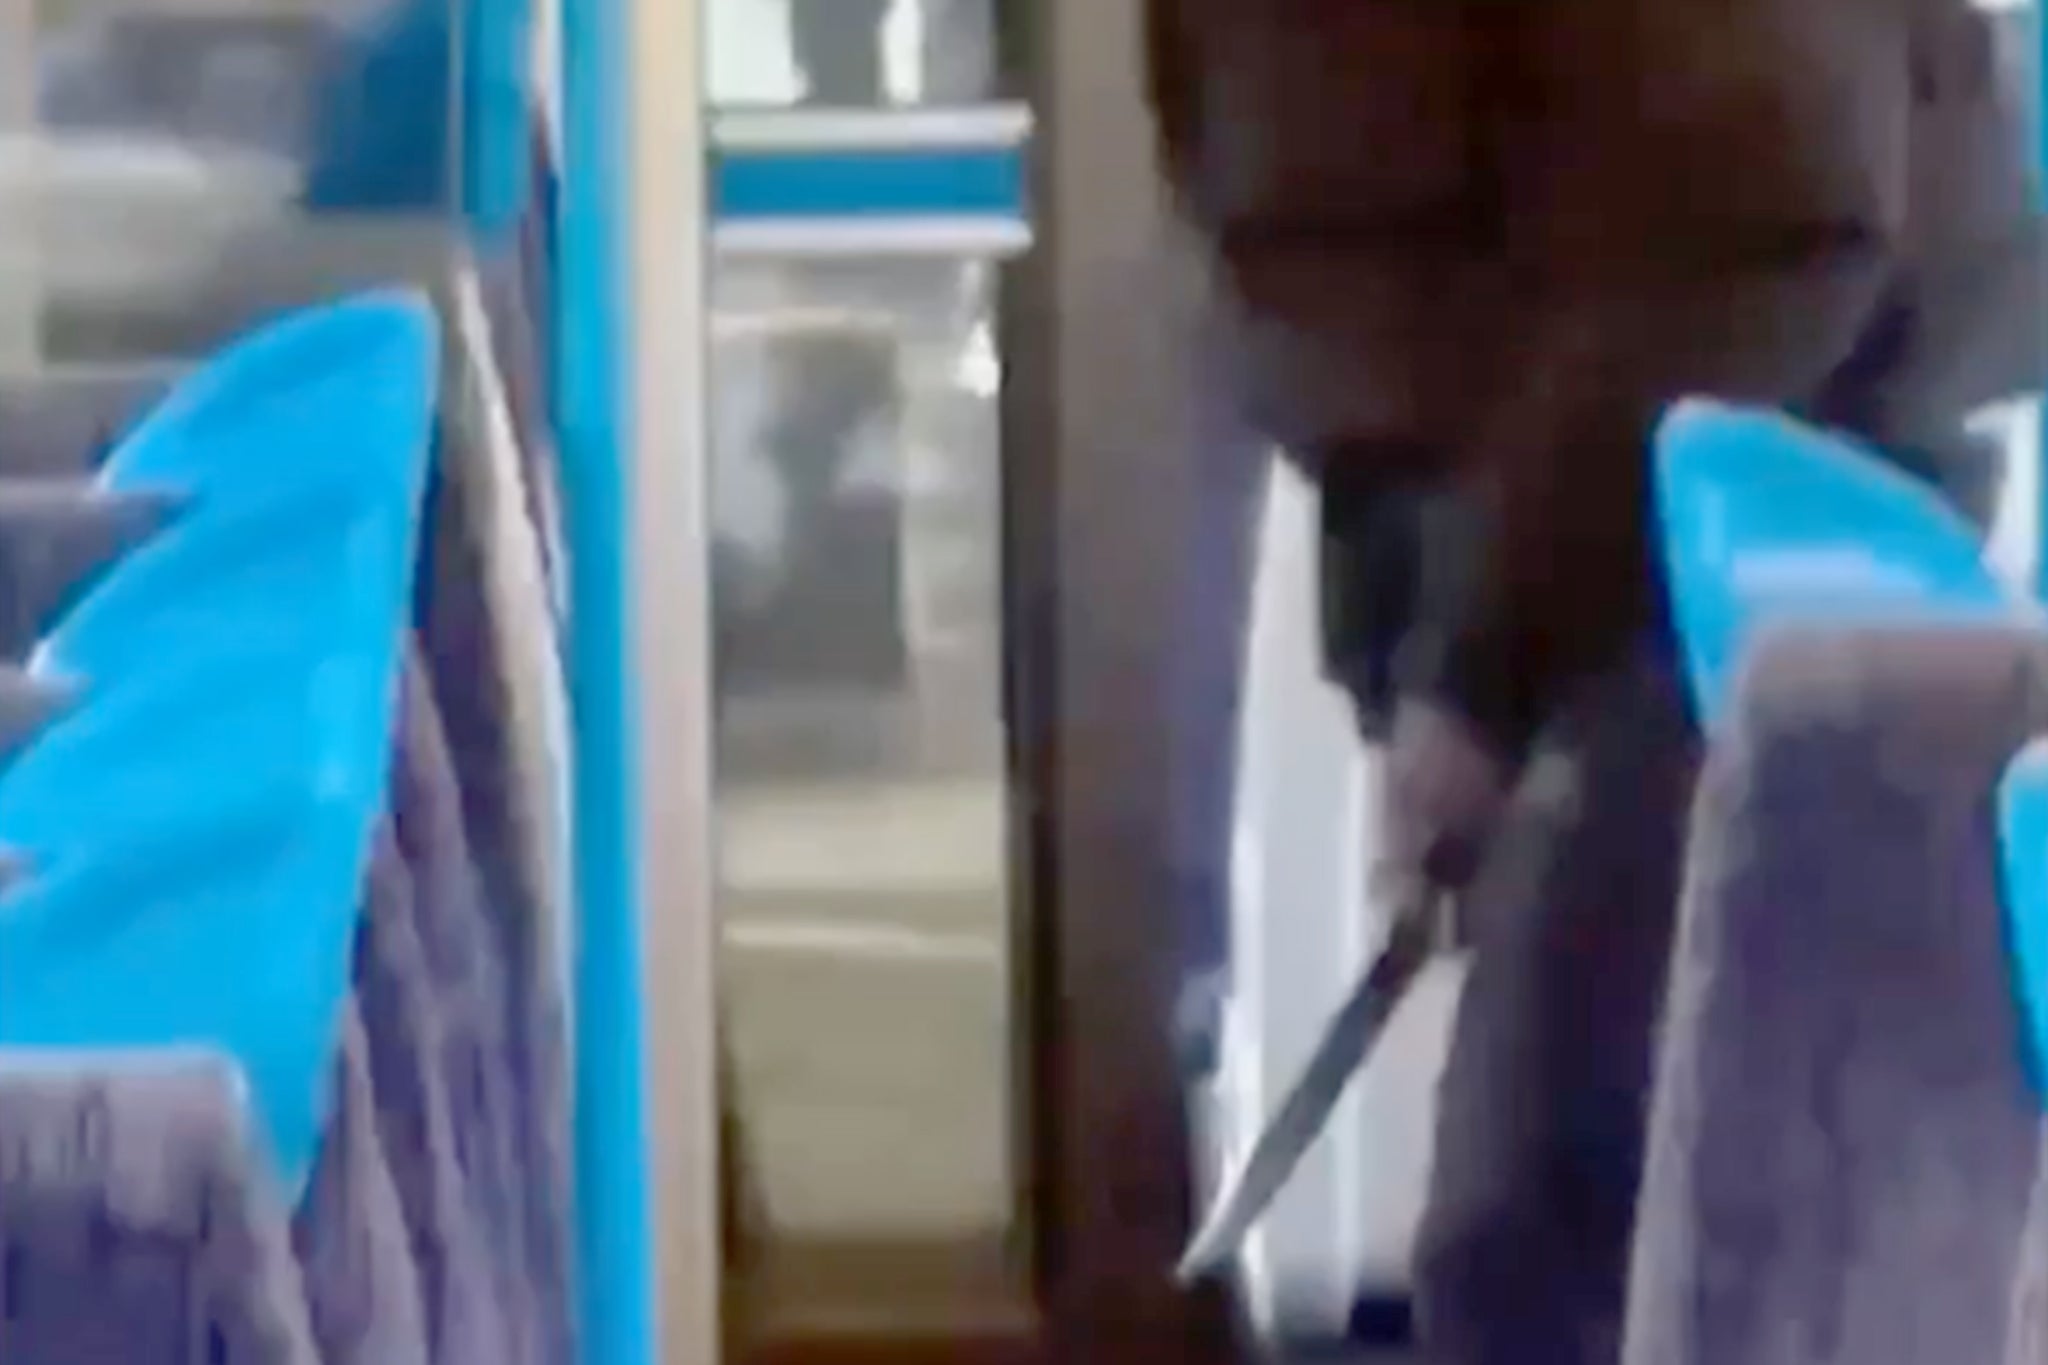 The shocking video shows a man in a puffer-style jacket and a mask attacking his victim